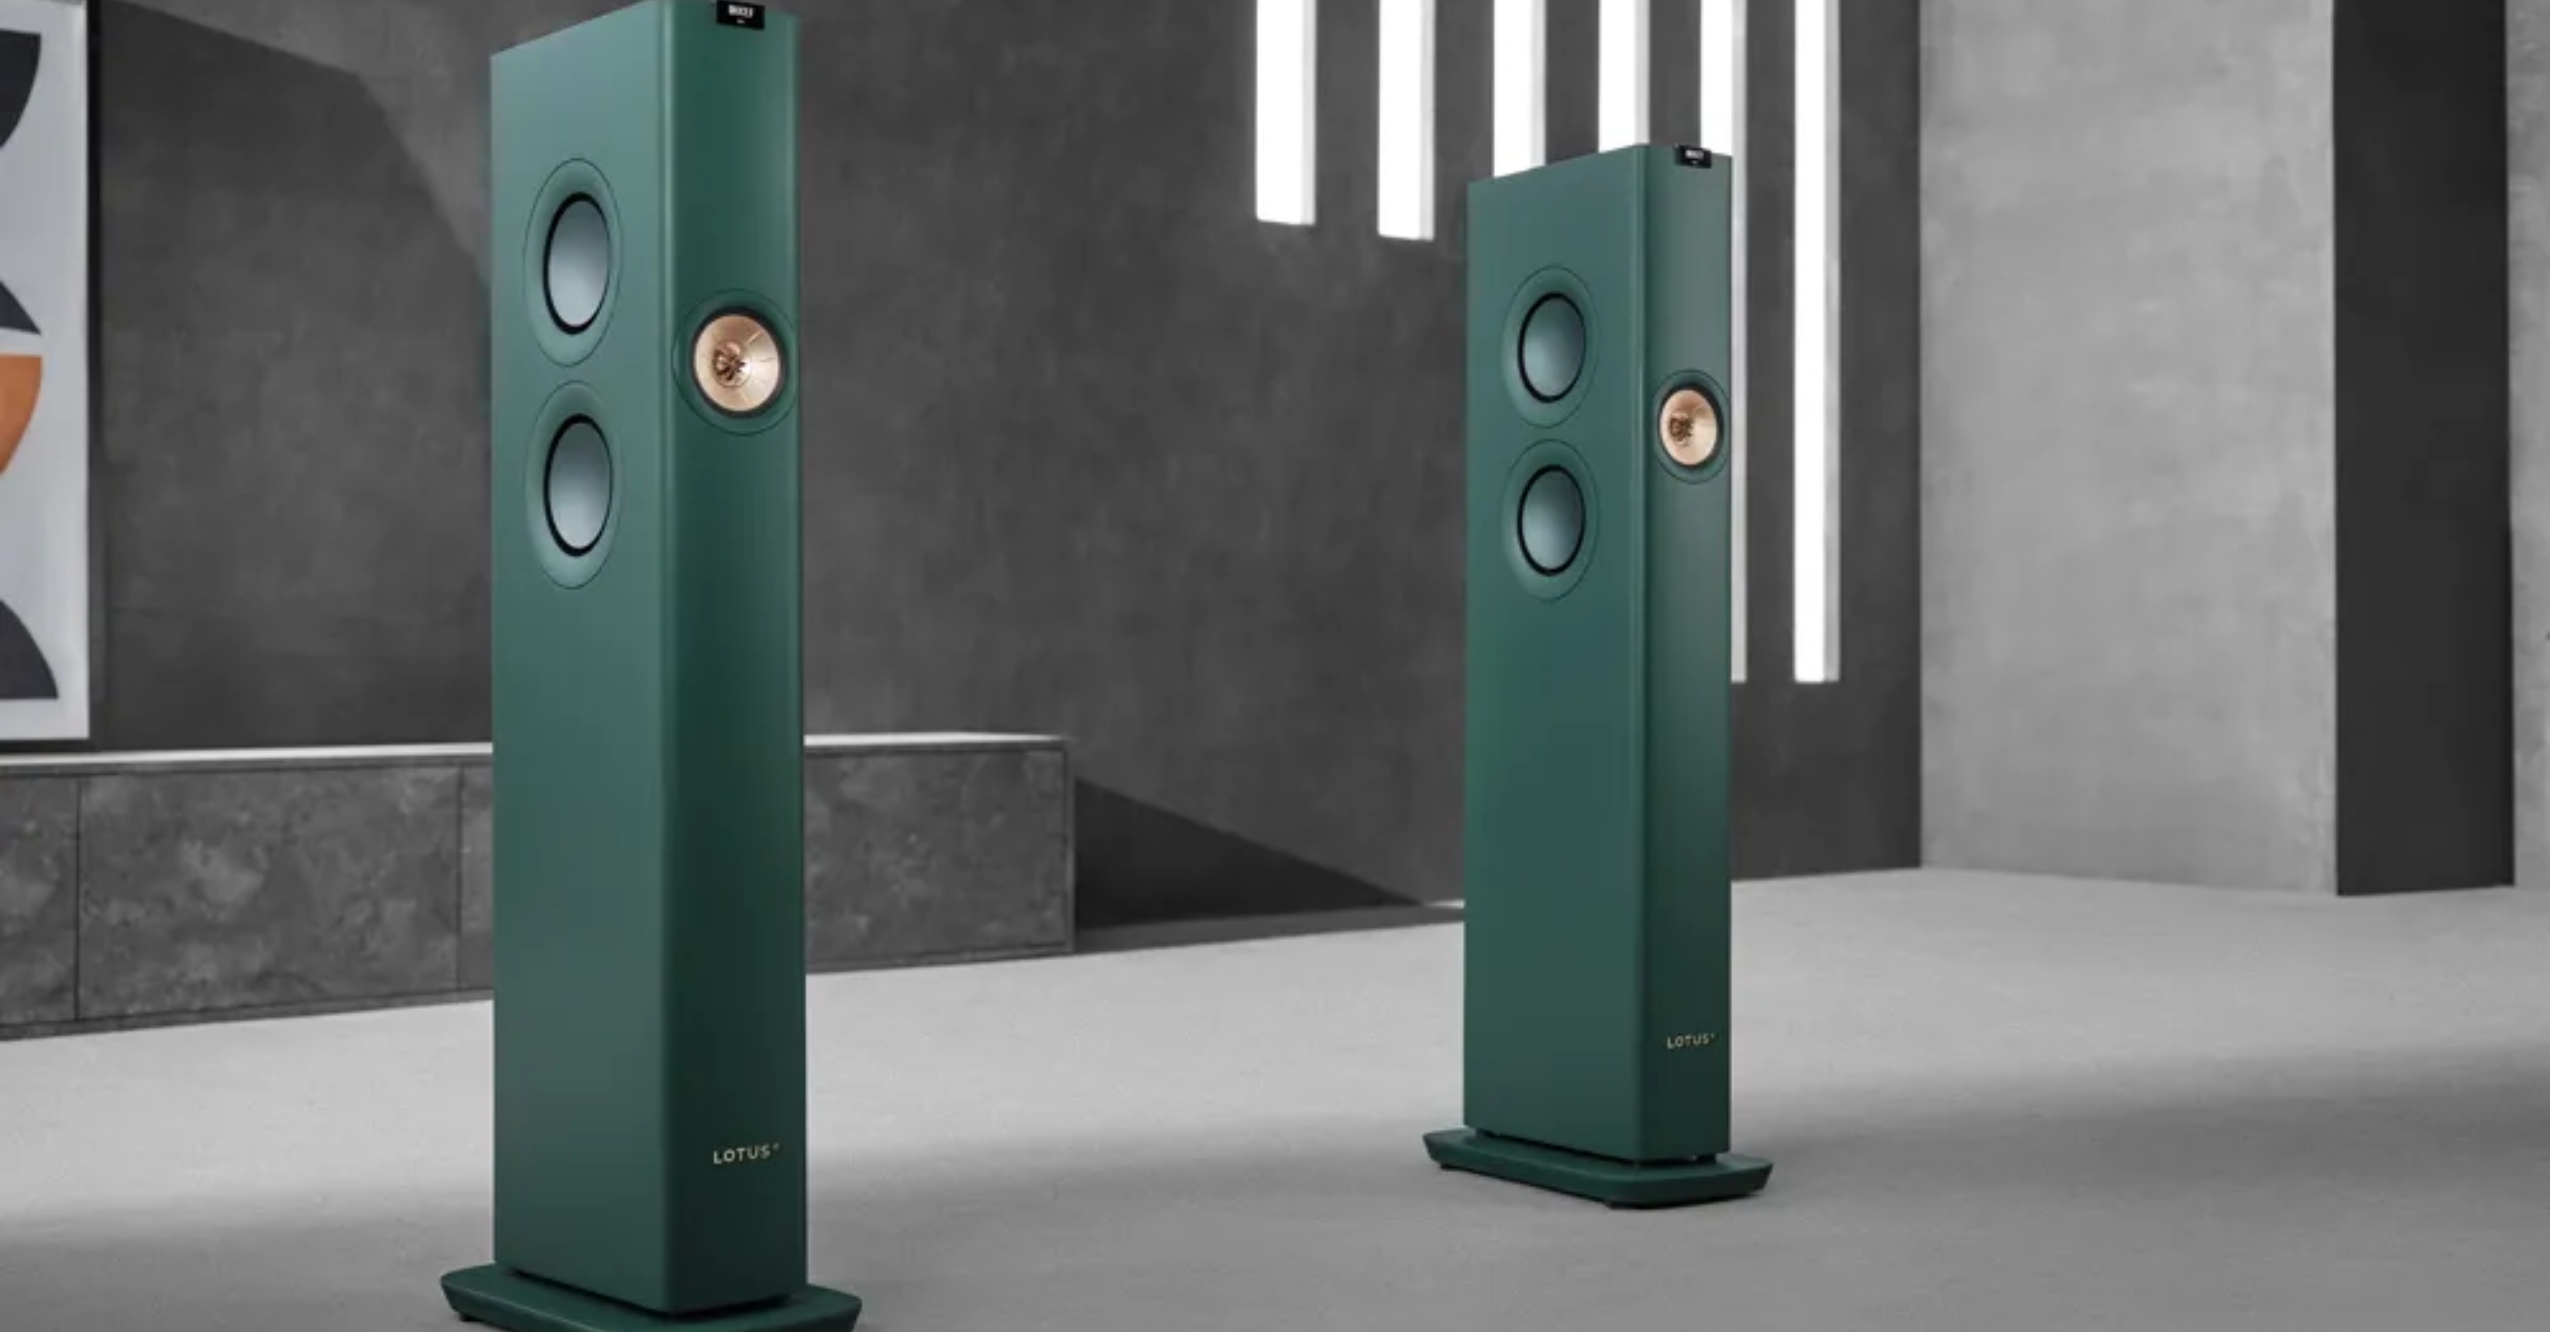 Kef Lotus Speakers Feature Kef Debuts Limited-Edition Speakers With British Automaker Lotus